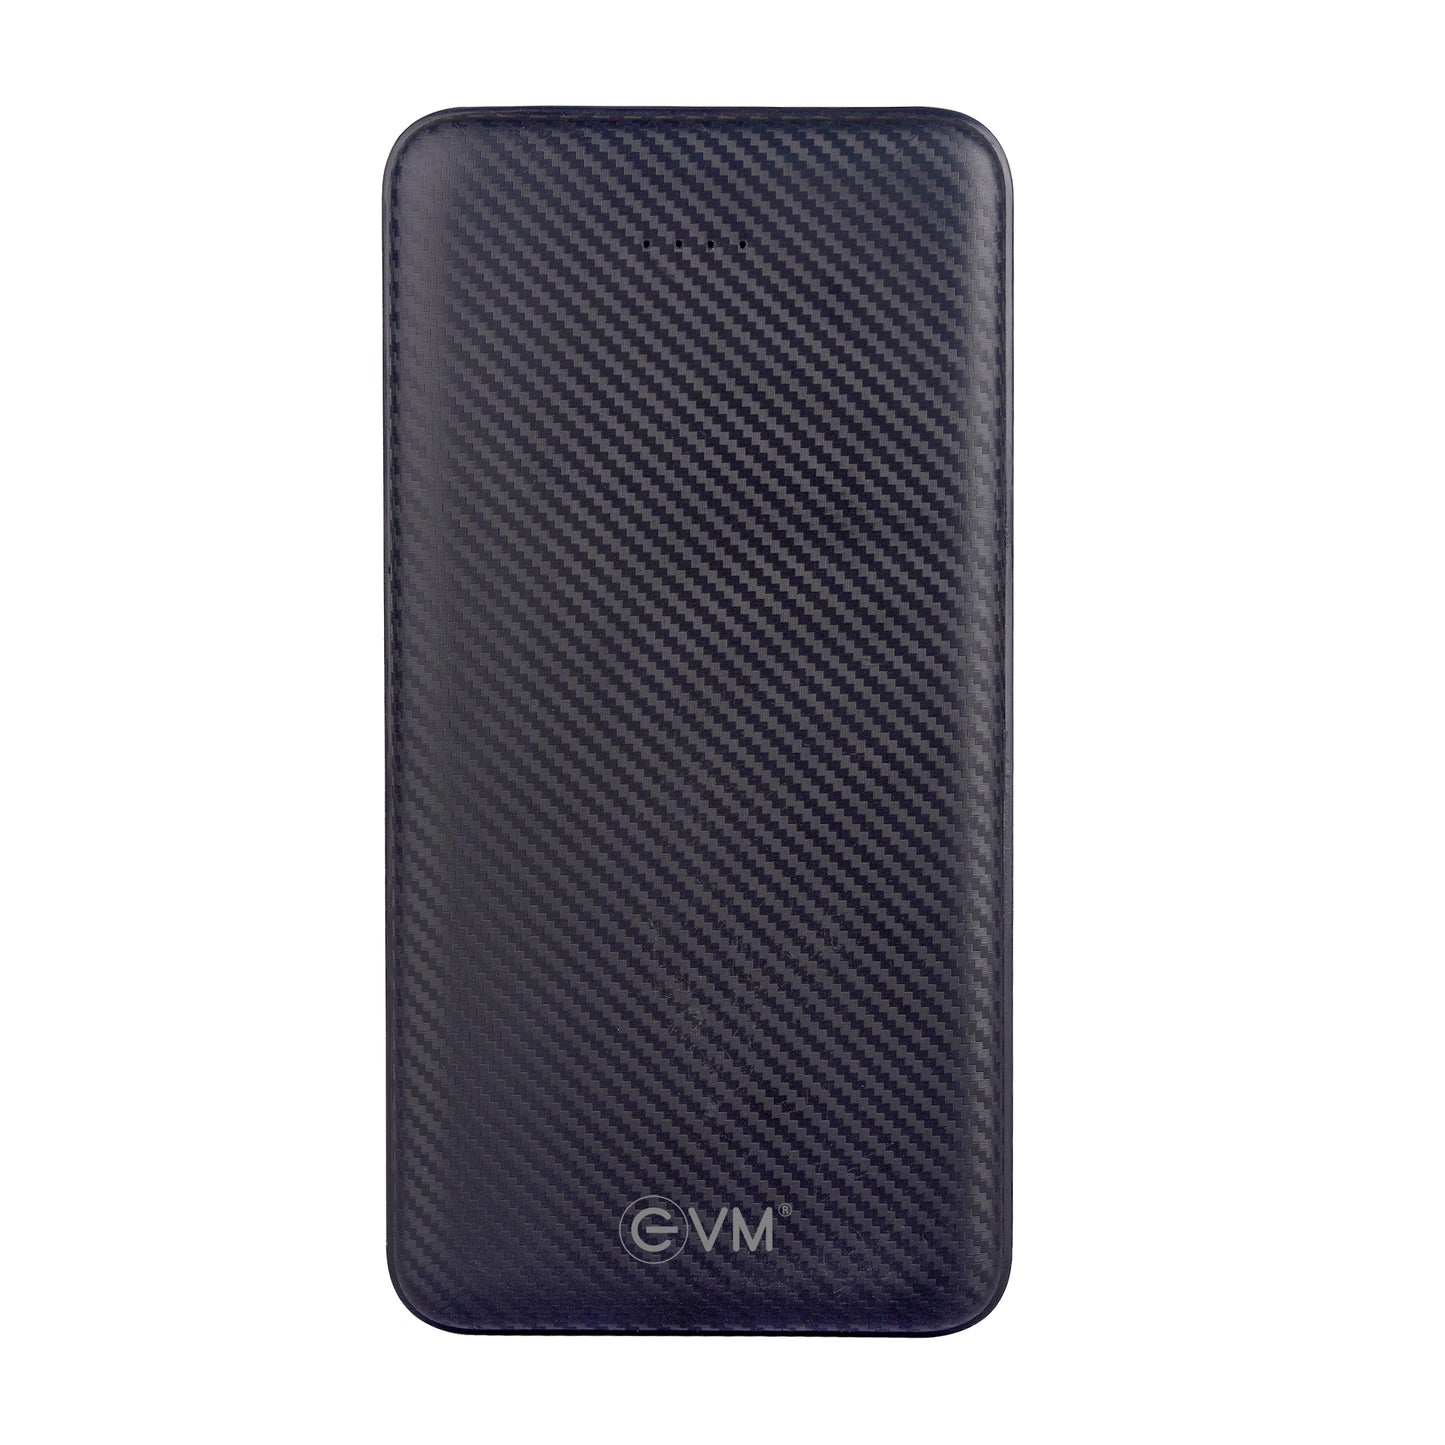 Personalized Black 10000mAh Power Bank - For Corporate Gifting, Event Gifting, Freebies, Promotions - EnZest  HK1004